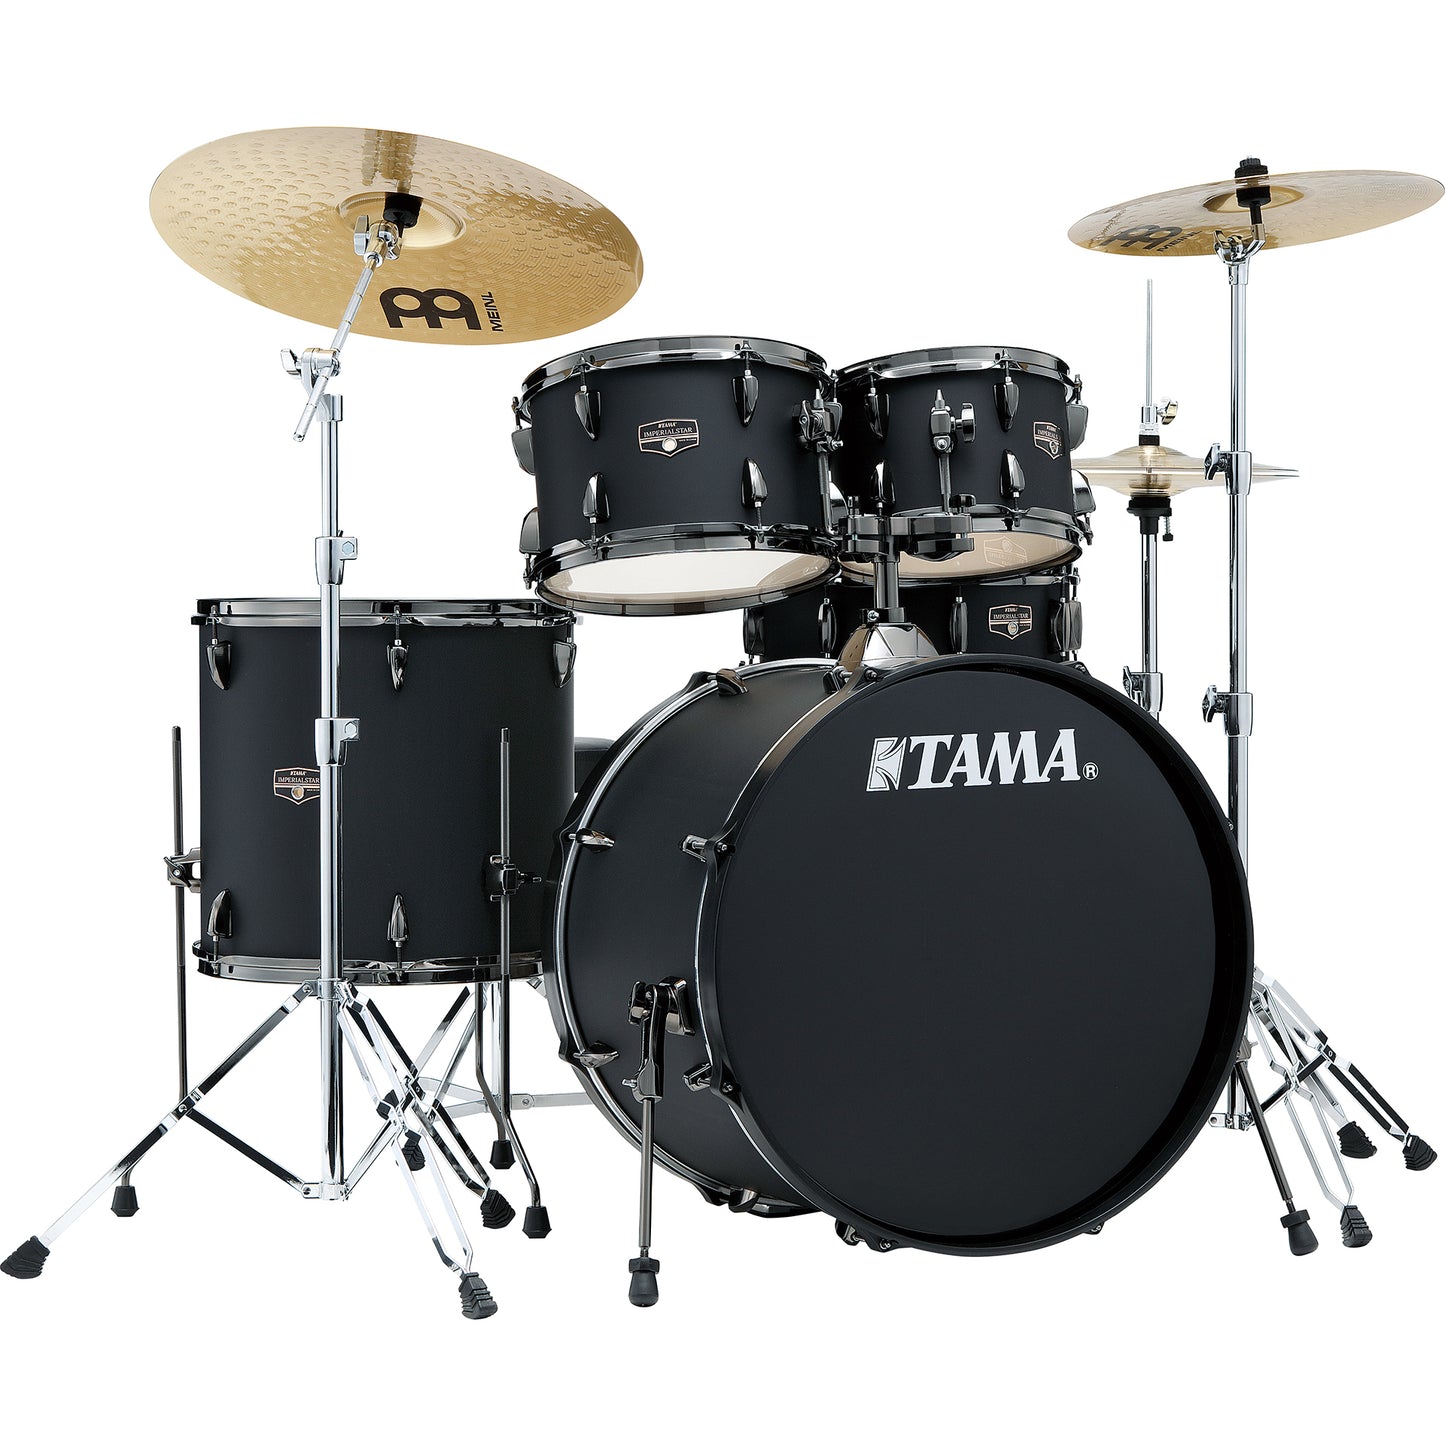 Tama Imperialstar Series 5-Piece Complete Drum Set - Blacked Out Black